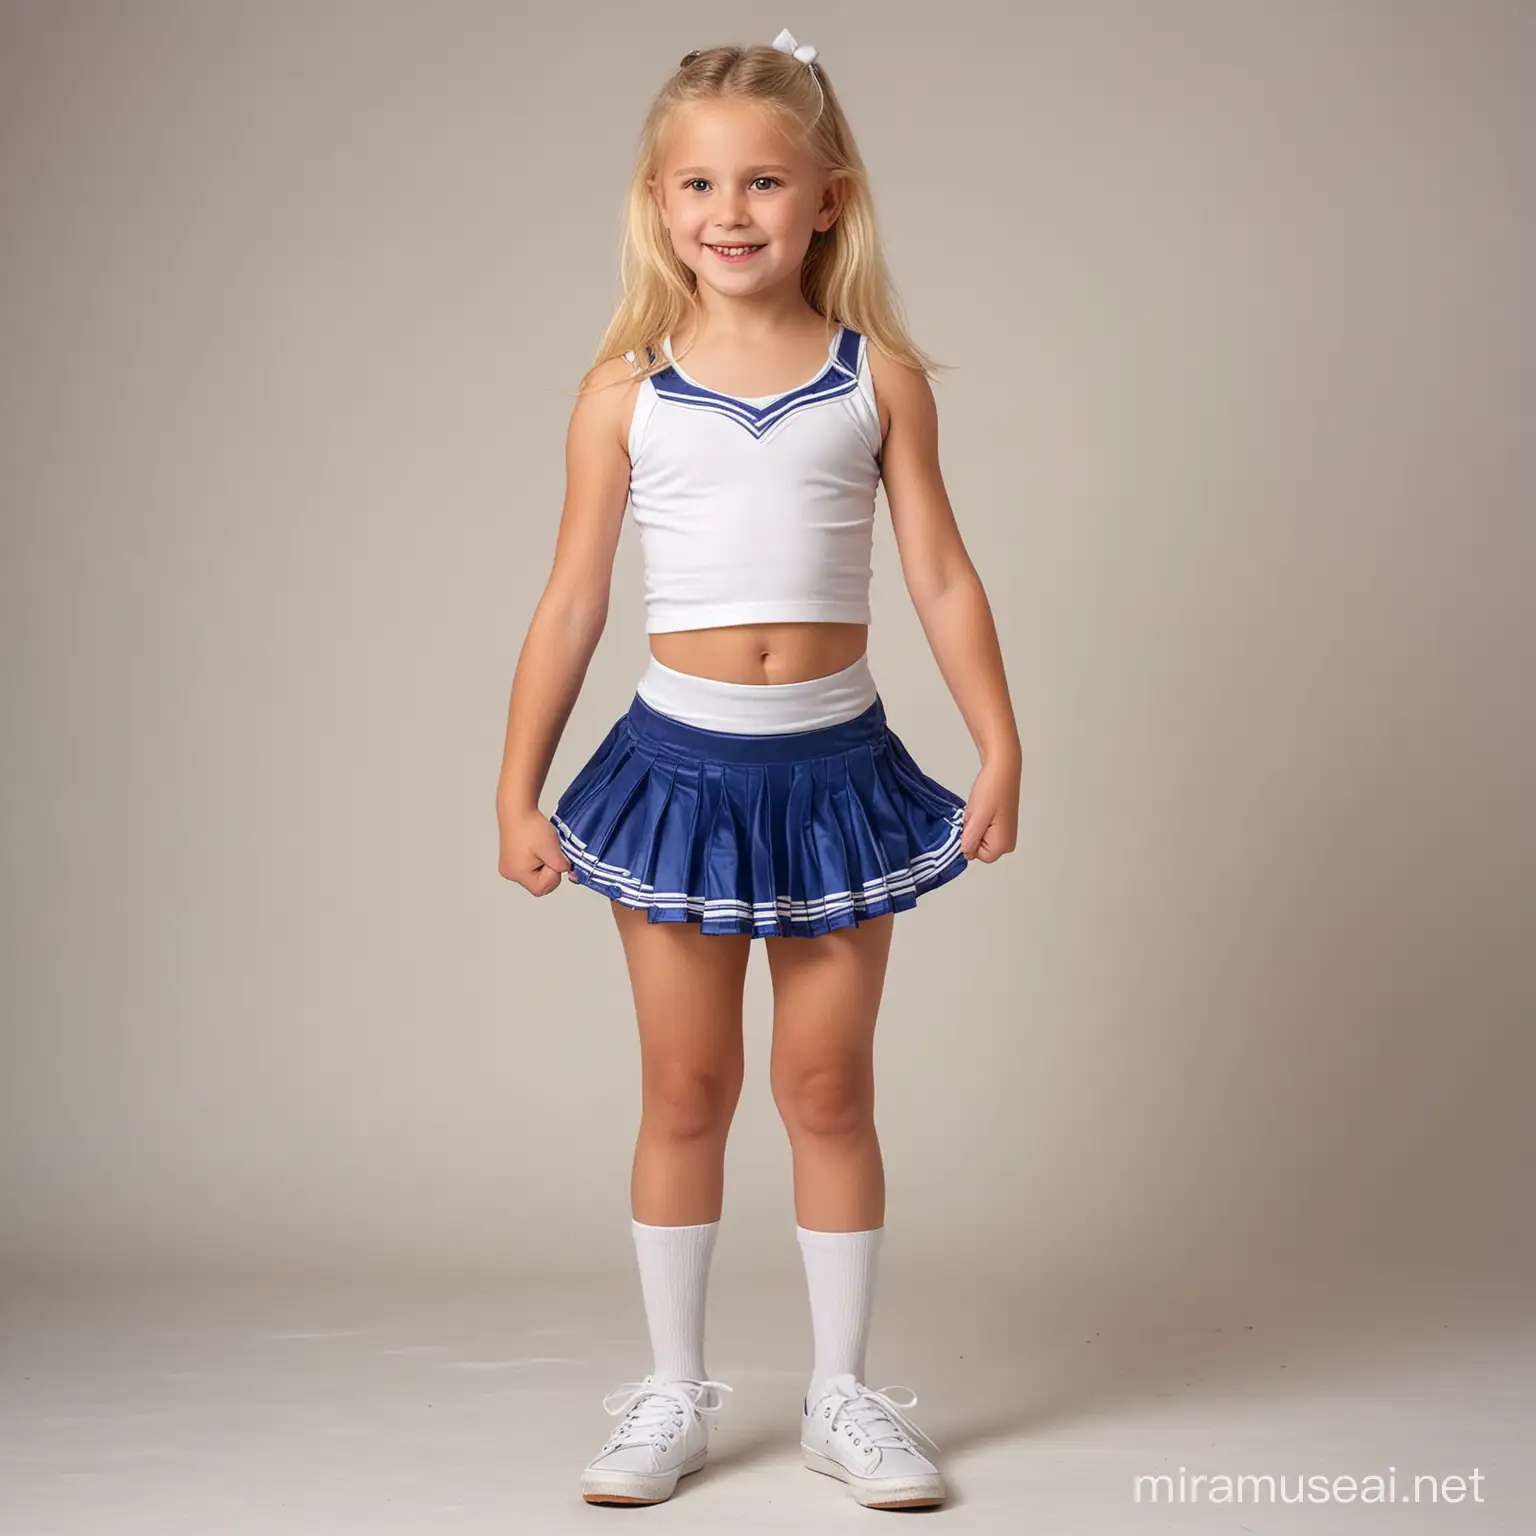 Young Blonde Cheerleader in Side View Wearing White Shoes and Cotton Skirt